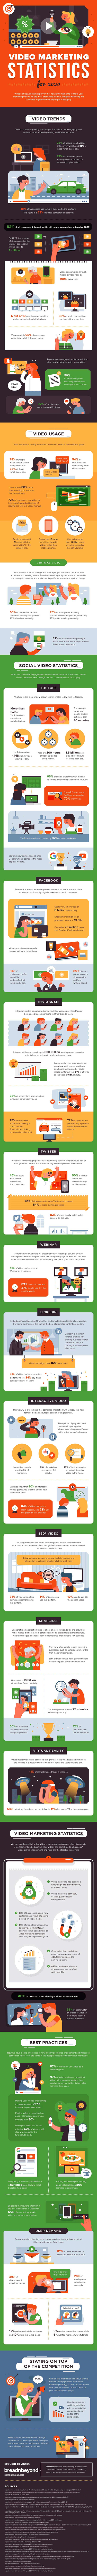 Video Marketing Strategy Infographic